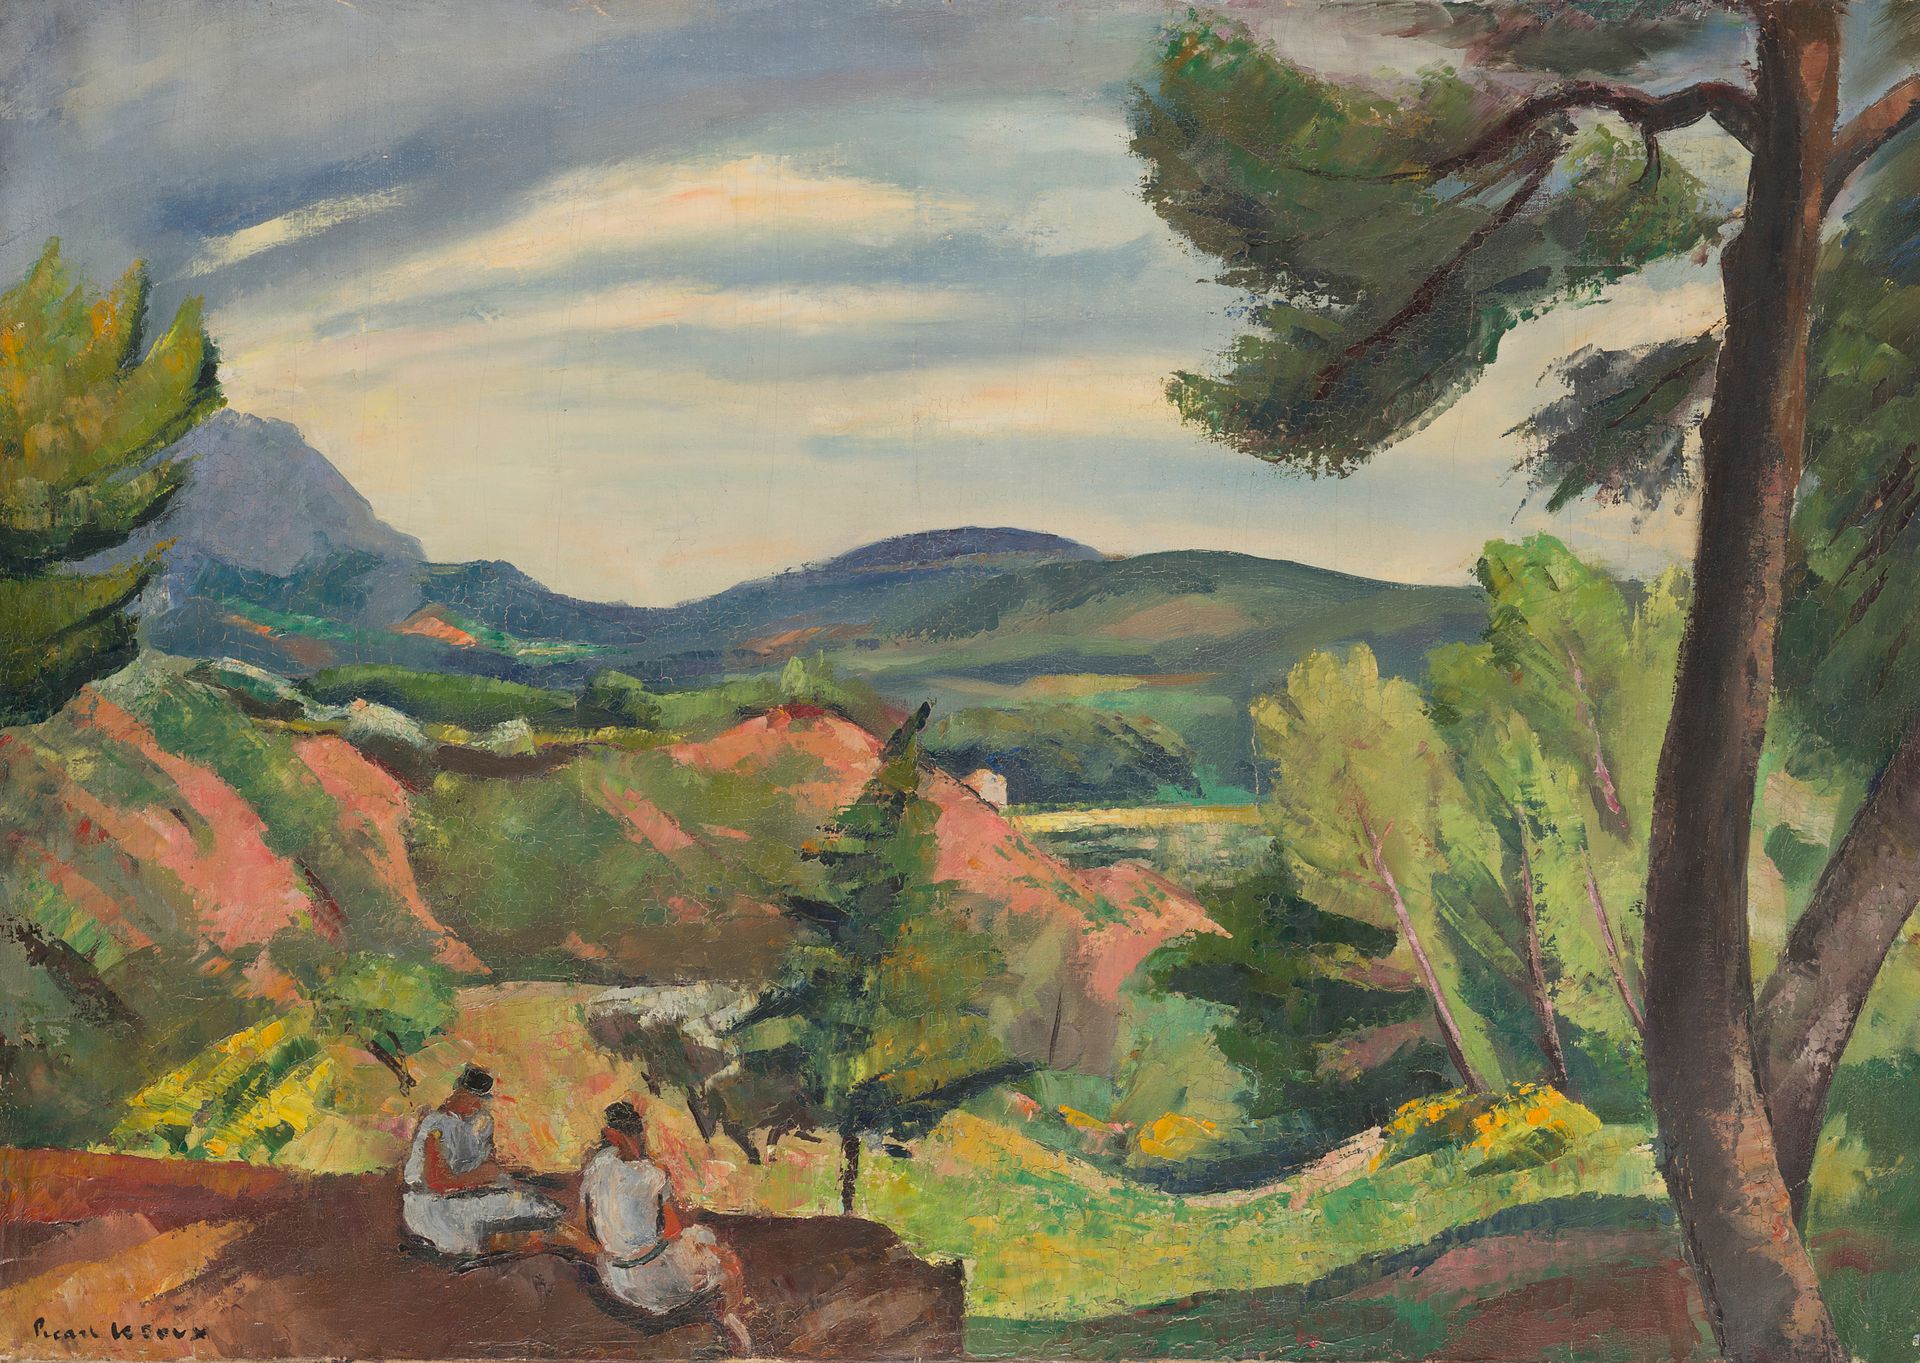 Null Charles PICART LE DOUX (1881-1959)
The strap, landscape of the South - Sain&hellip;